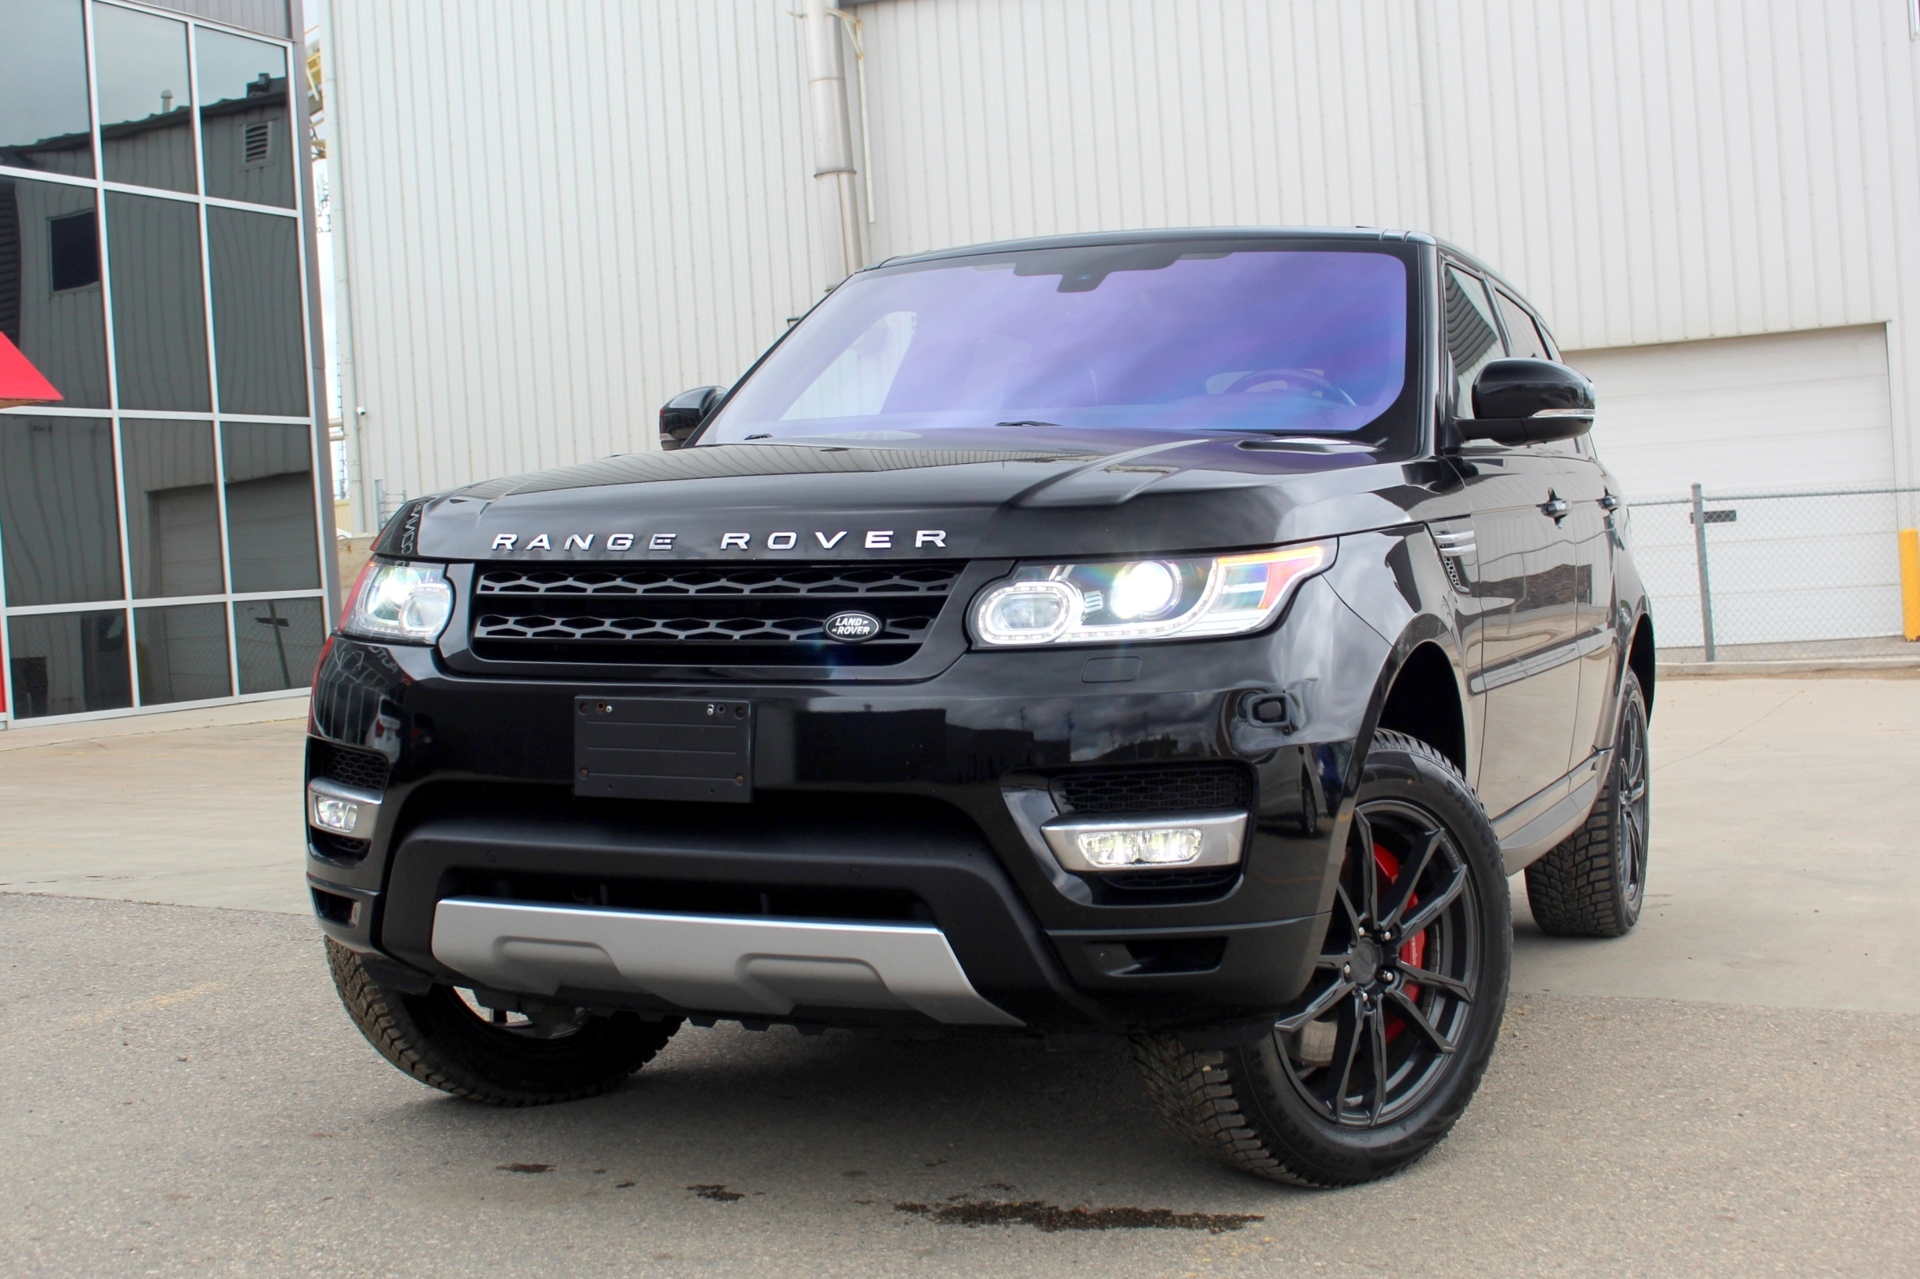 2016 Land Rover Range Rover Sport 5.0L V8 Supercharged - AWD - 510HP